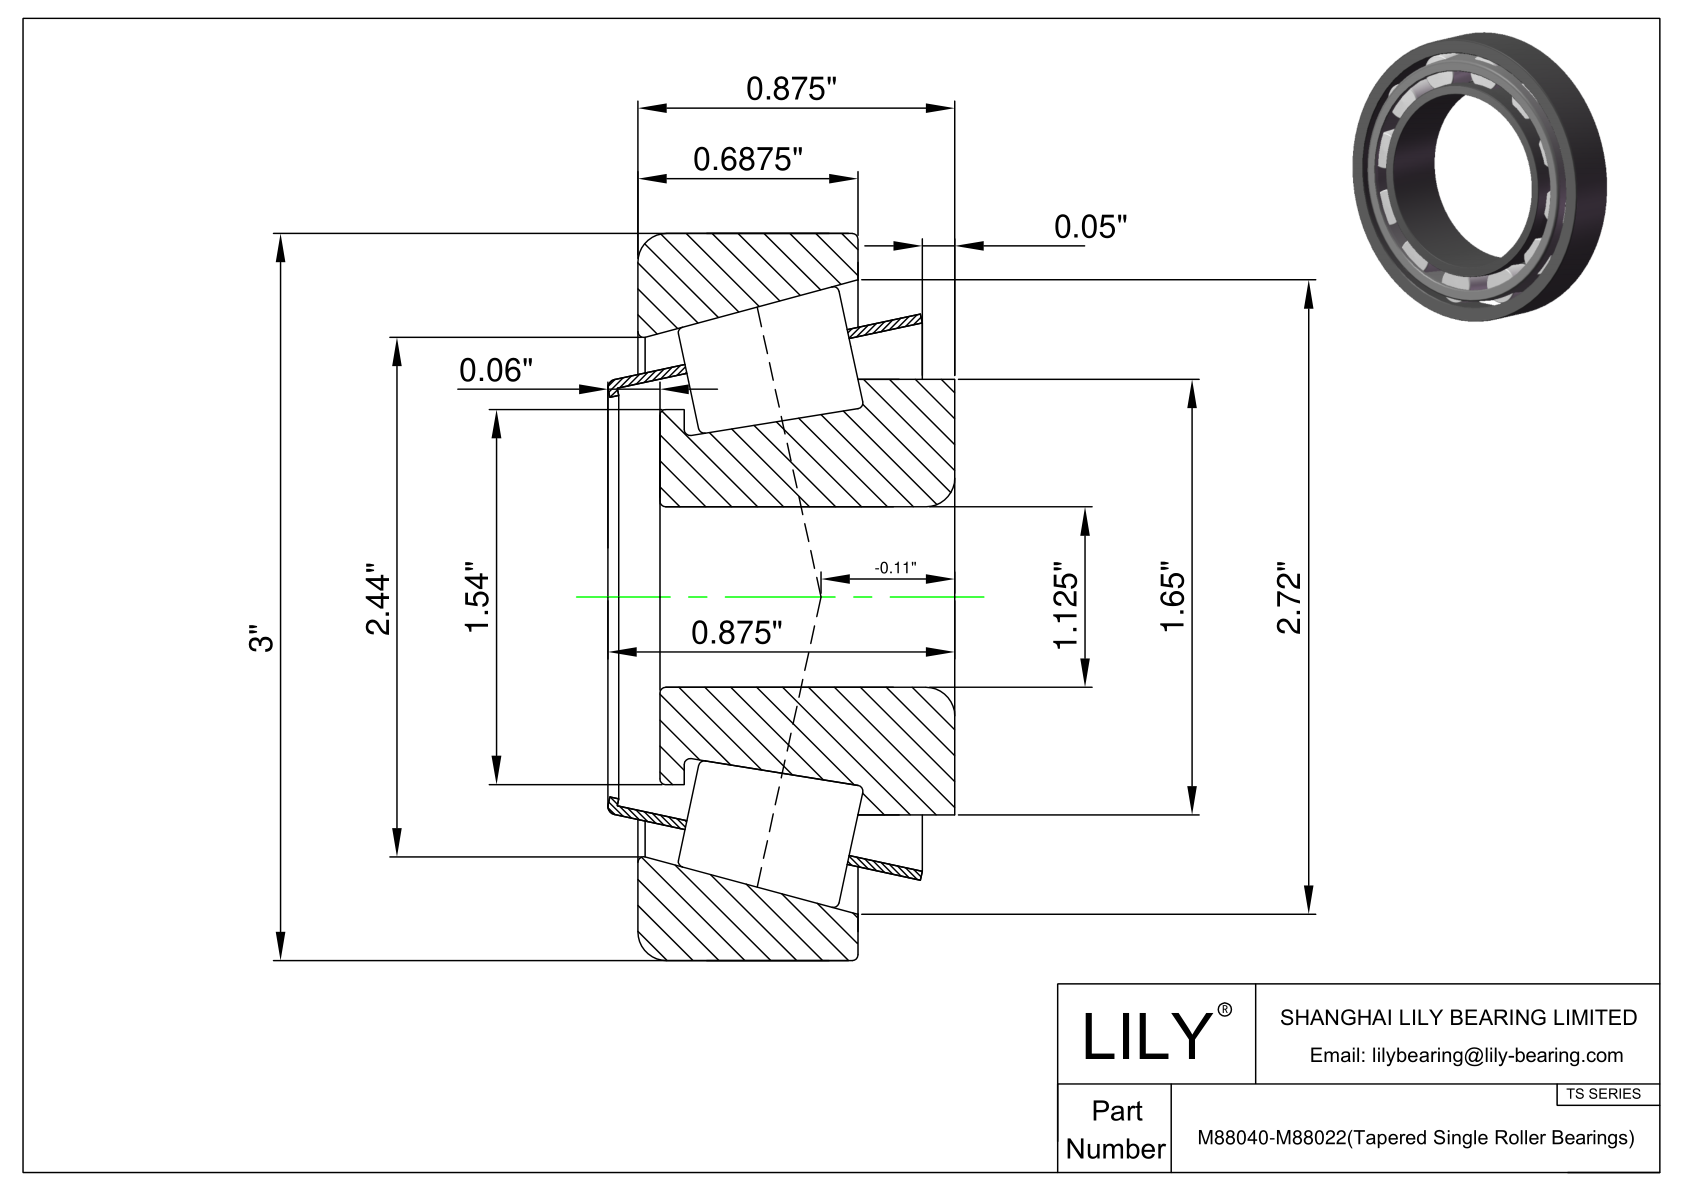 M88040-M88022 TS (Tapered Single Roller Bearings) (Imperial) cad drawing